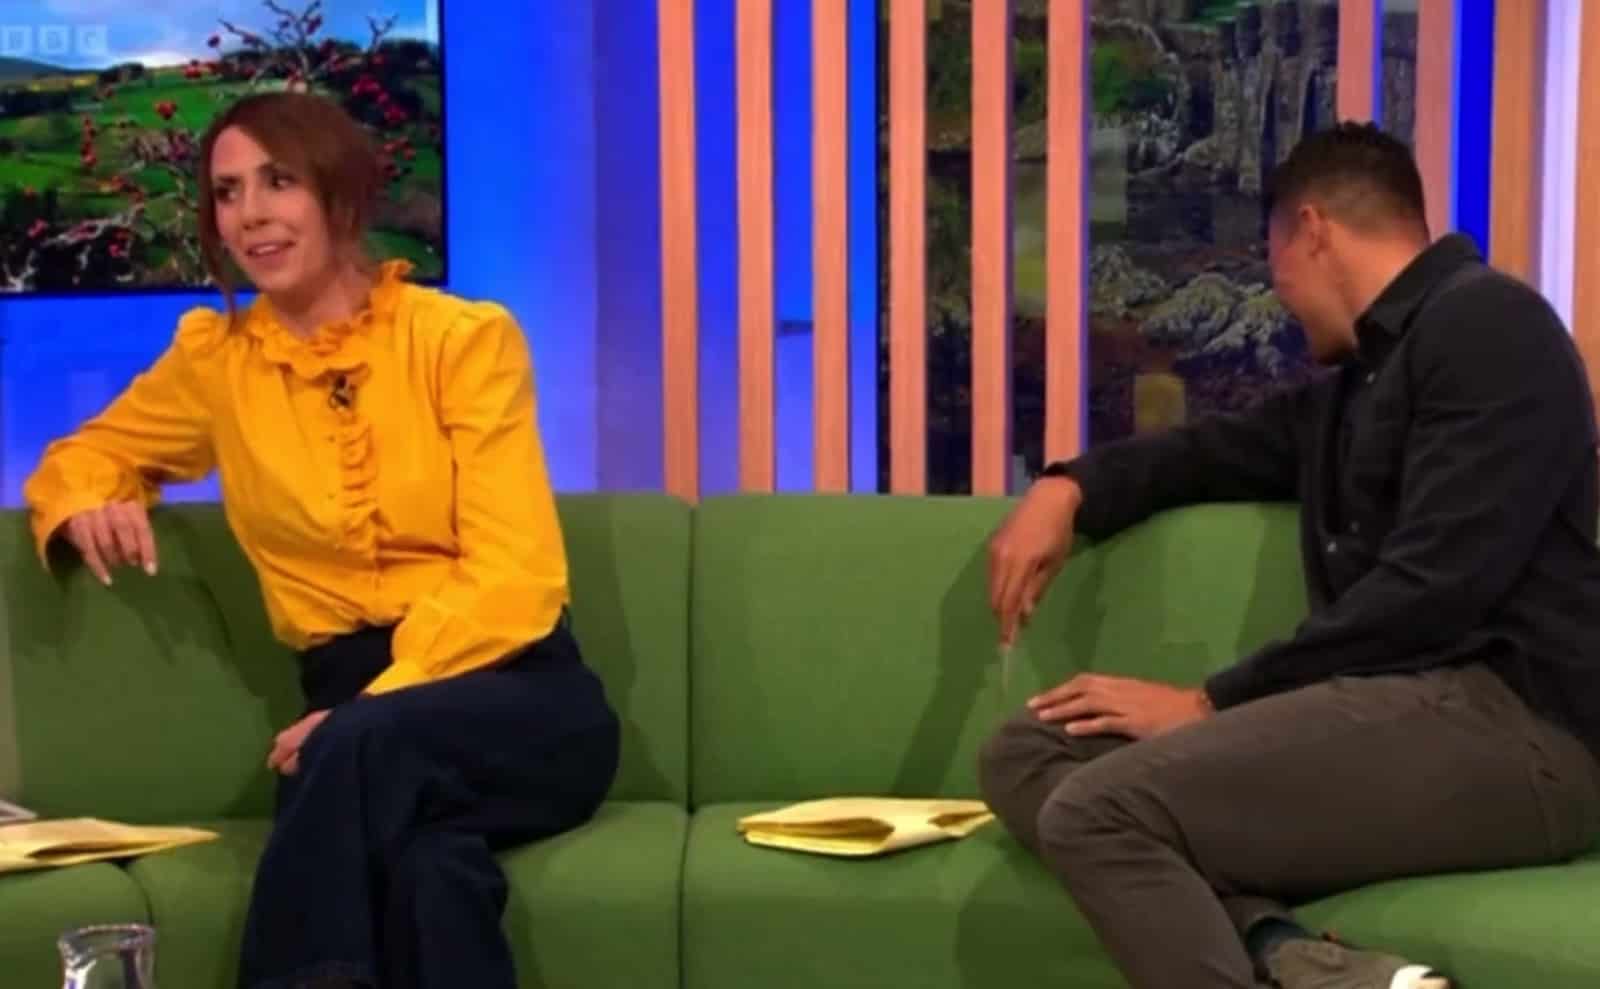 Watch: Reactions as Downton Abbey star slams Johnson on One Show